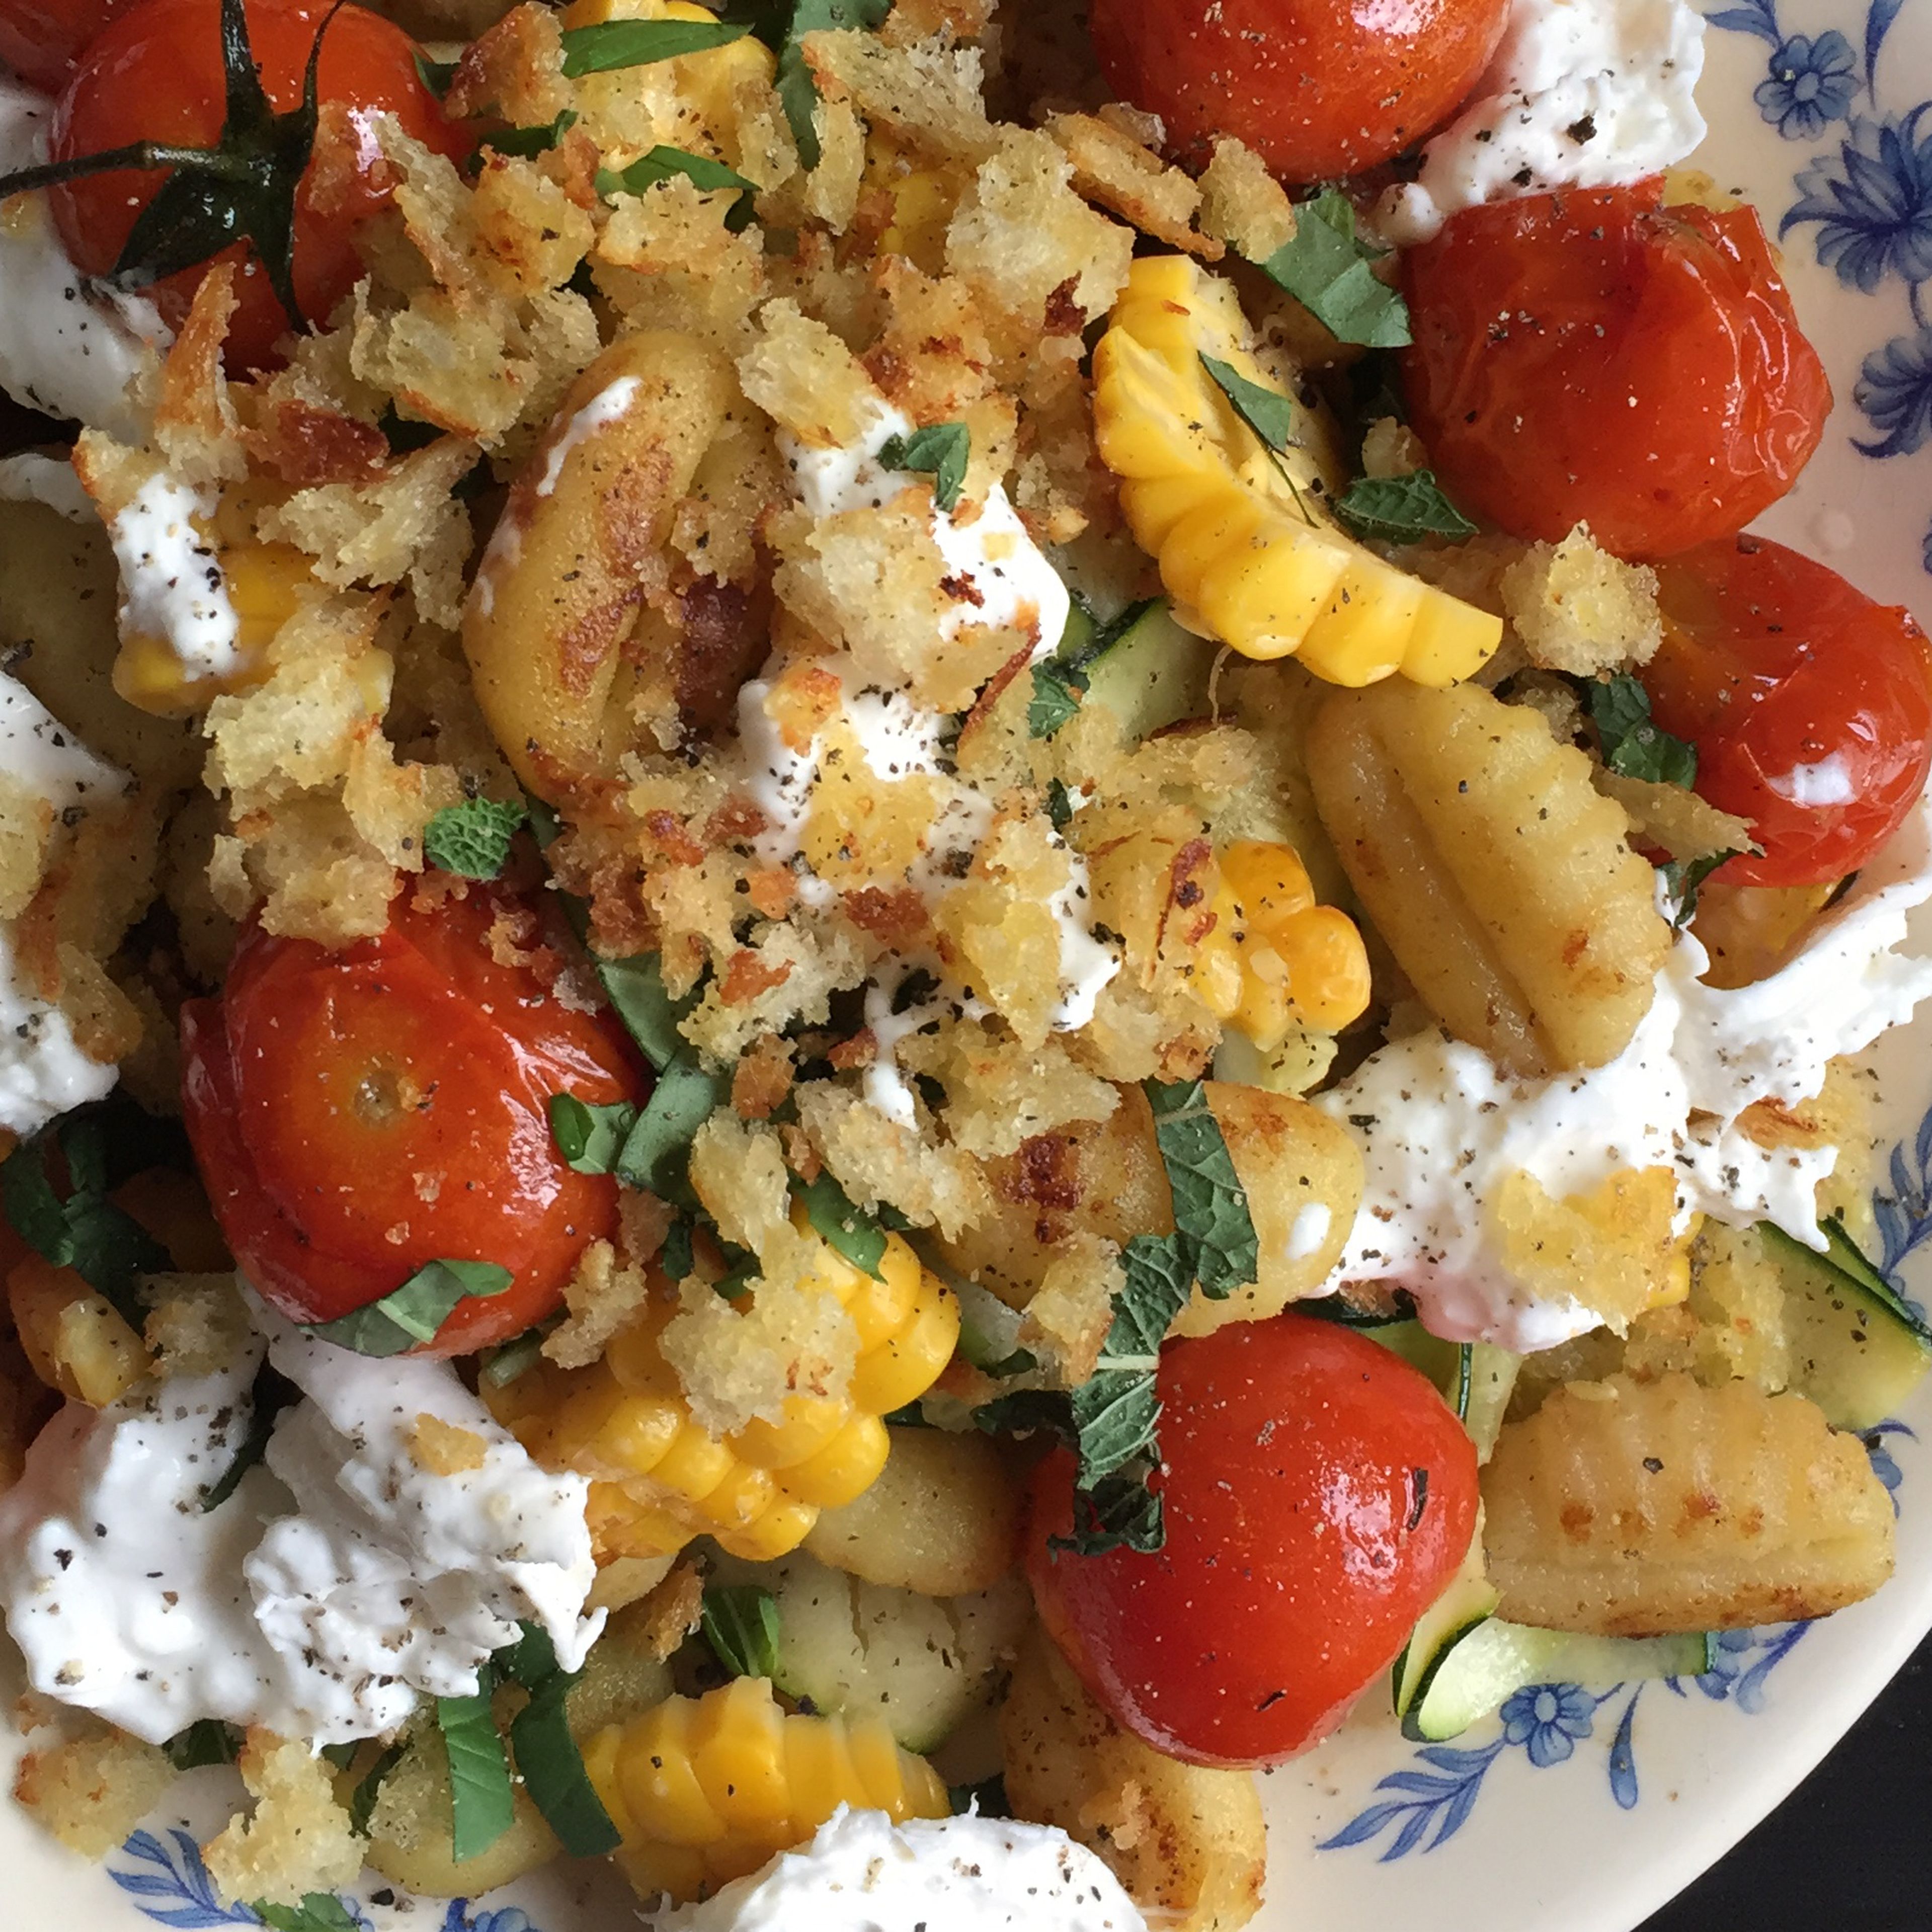 Serve gnocchi with zucchini, corn, oven tomatoes (with the oil), breadcrumbs, herbs, and burrata cheese. Season with lemon juice, salt, and pepper to taste.